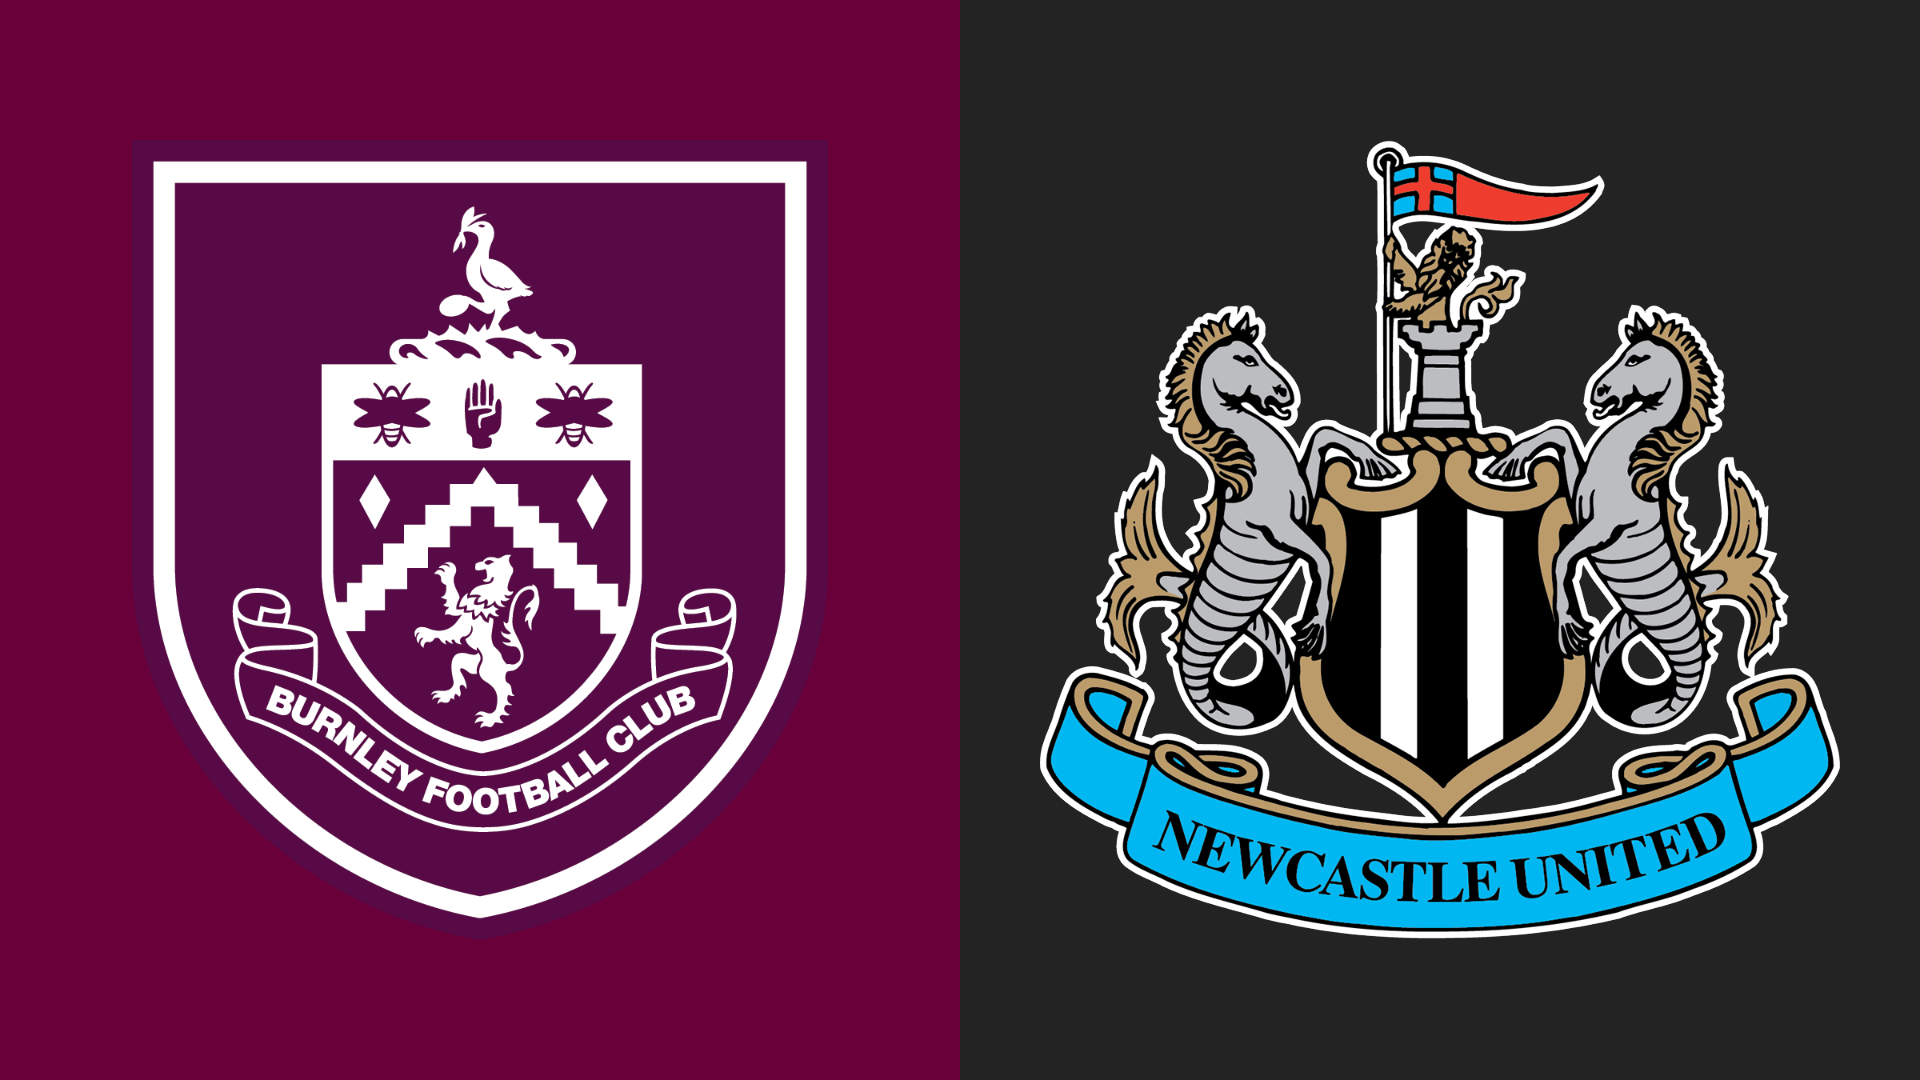 Burnley v Newcastle United preview: Team news, head-to-head and stats